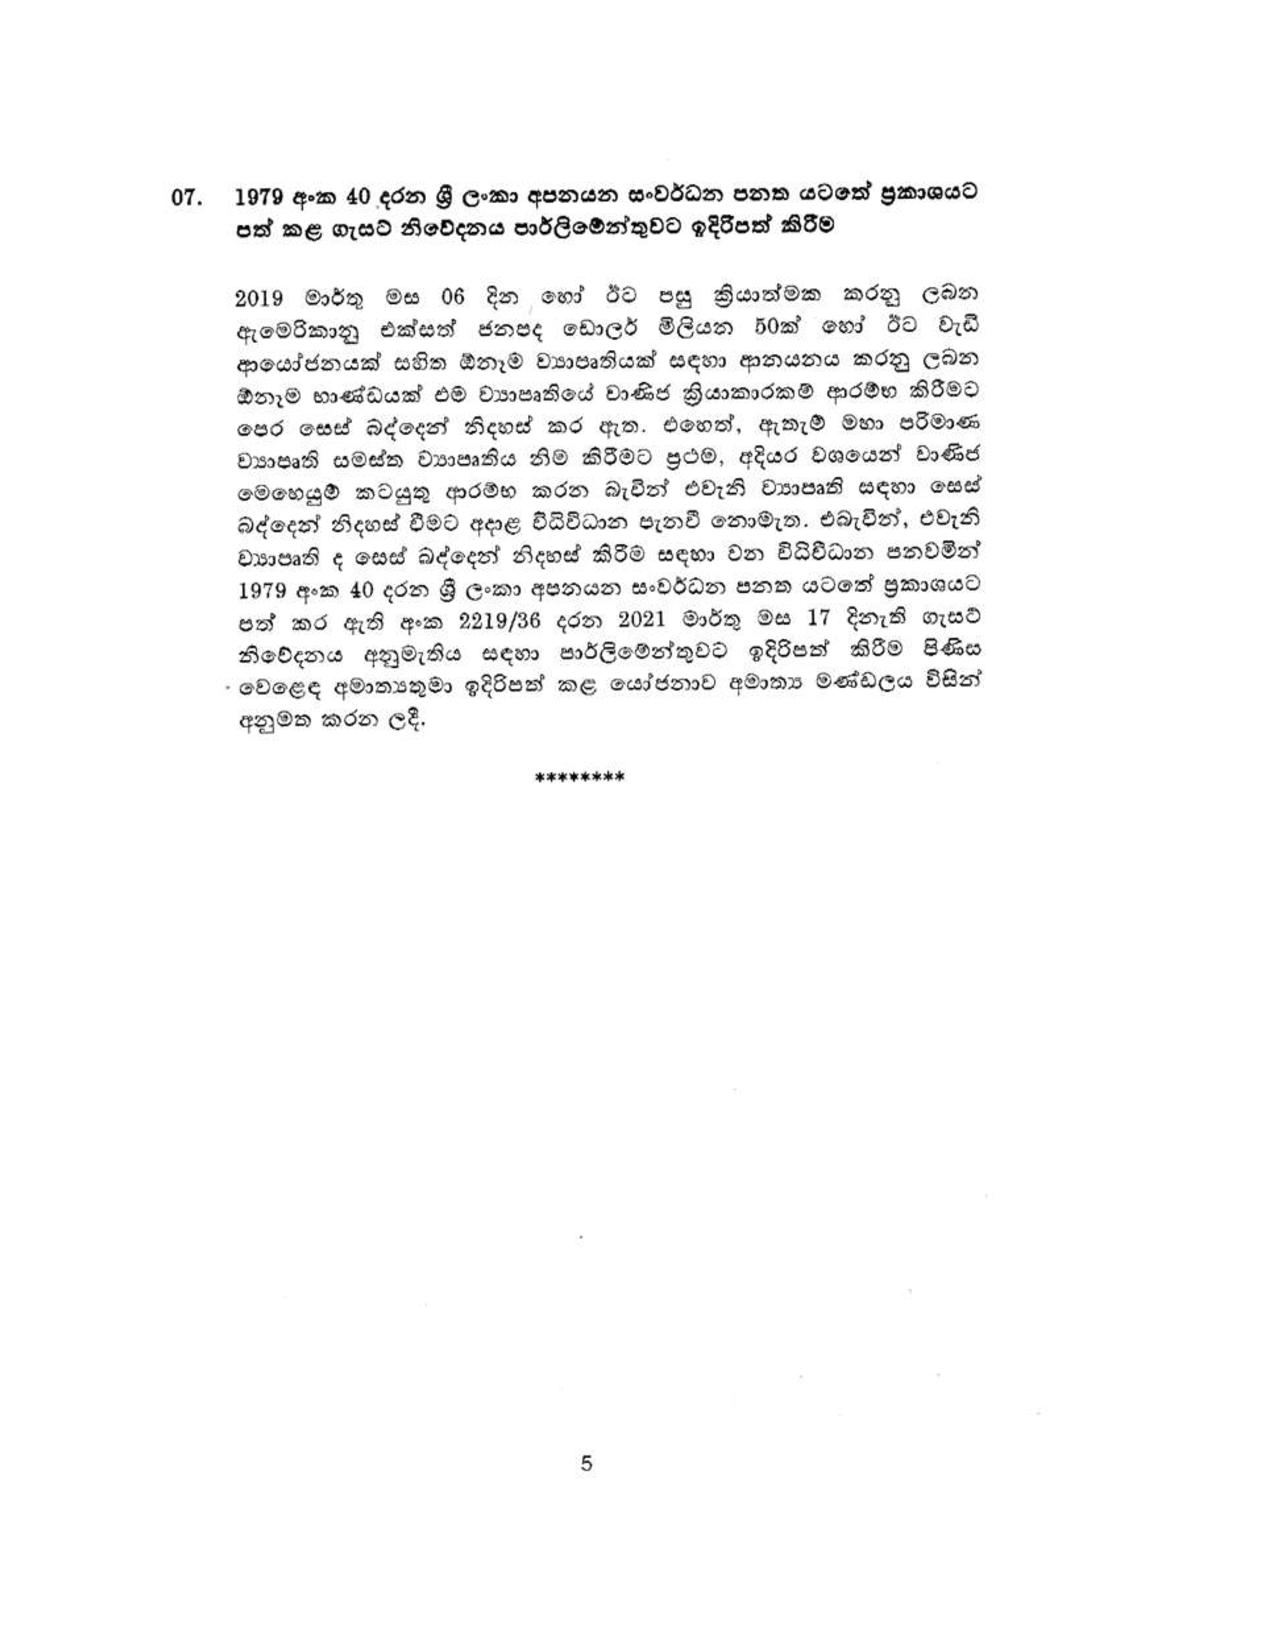 Cabinet Decision on 10.05.2021 page 005